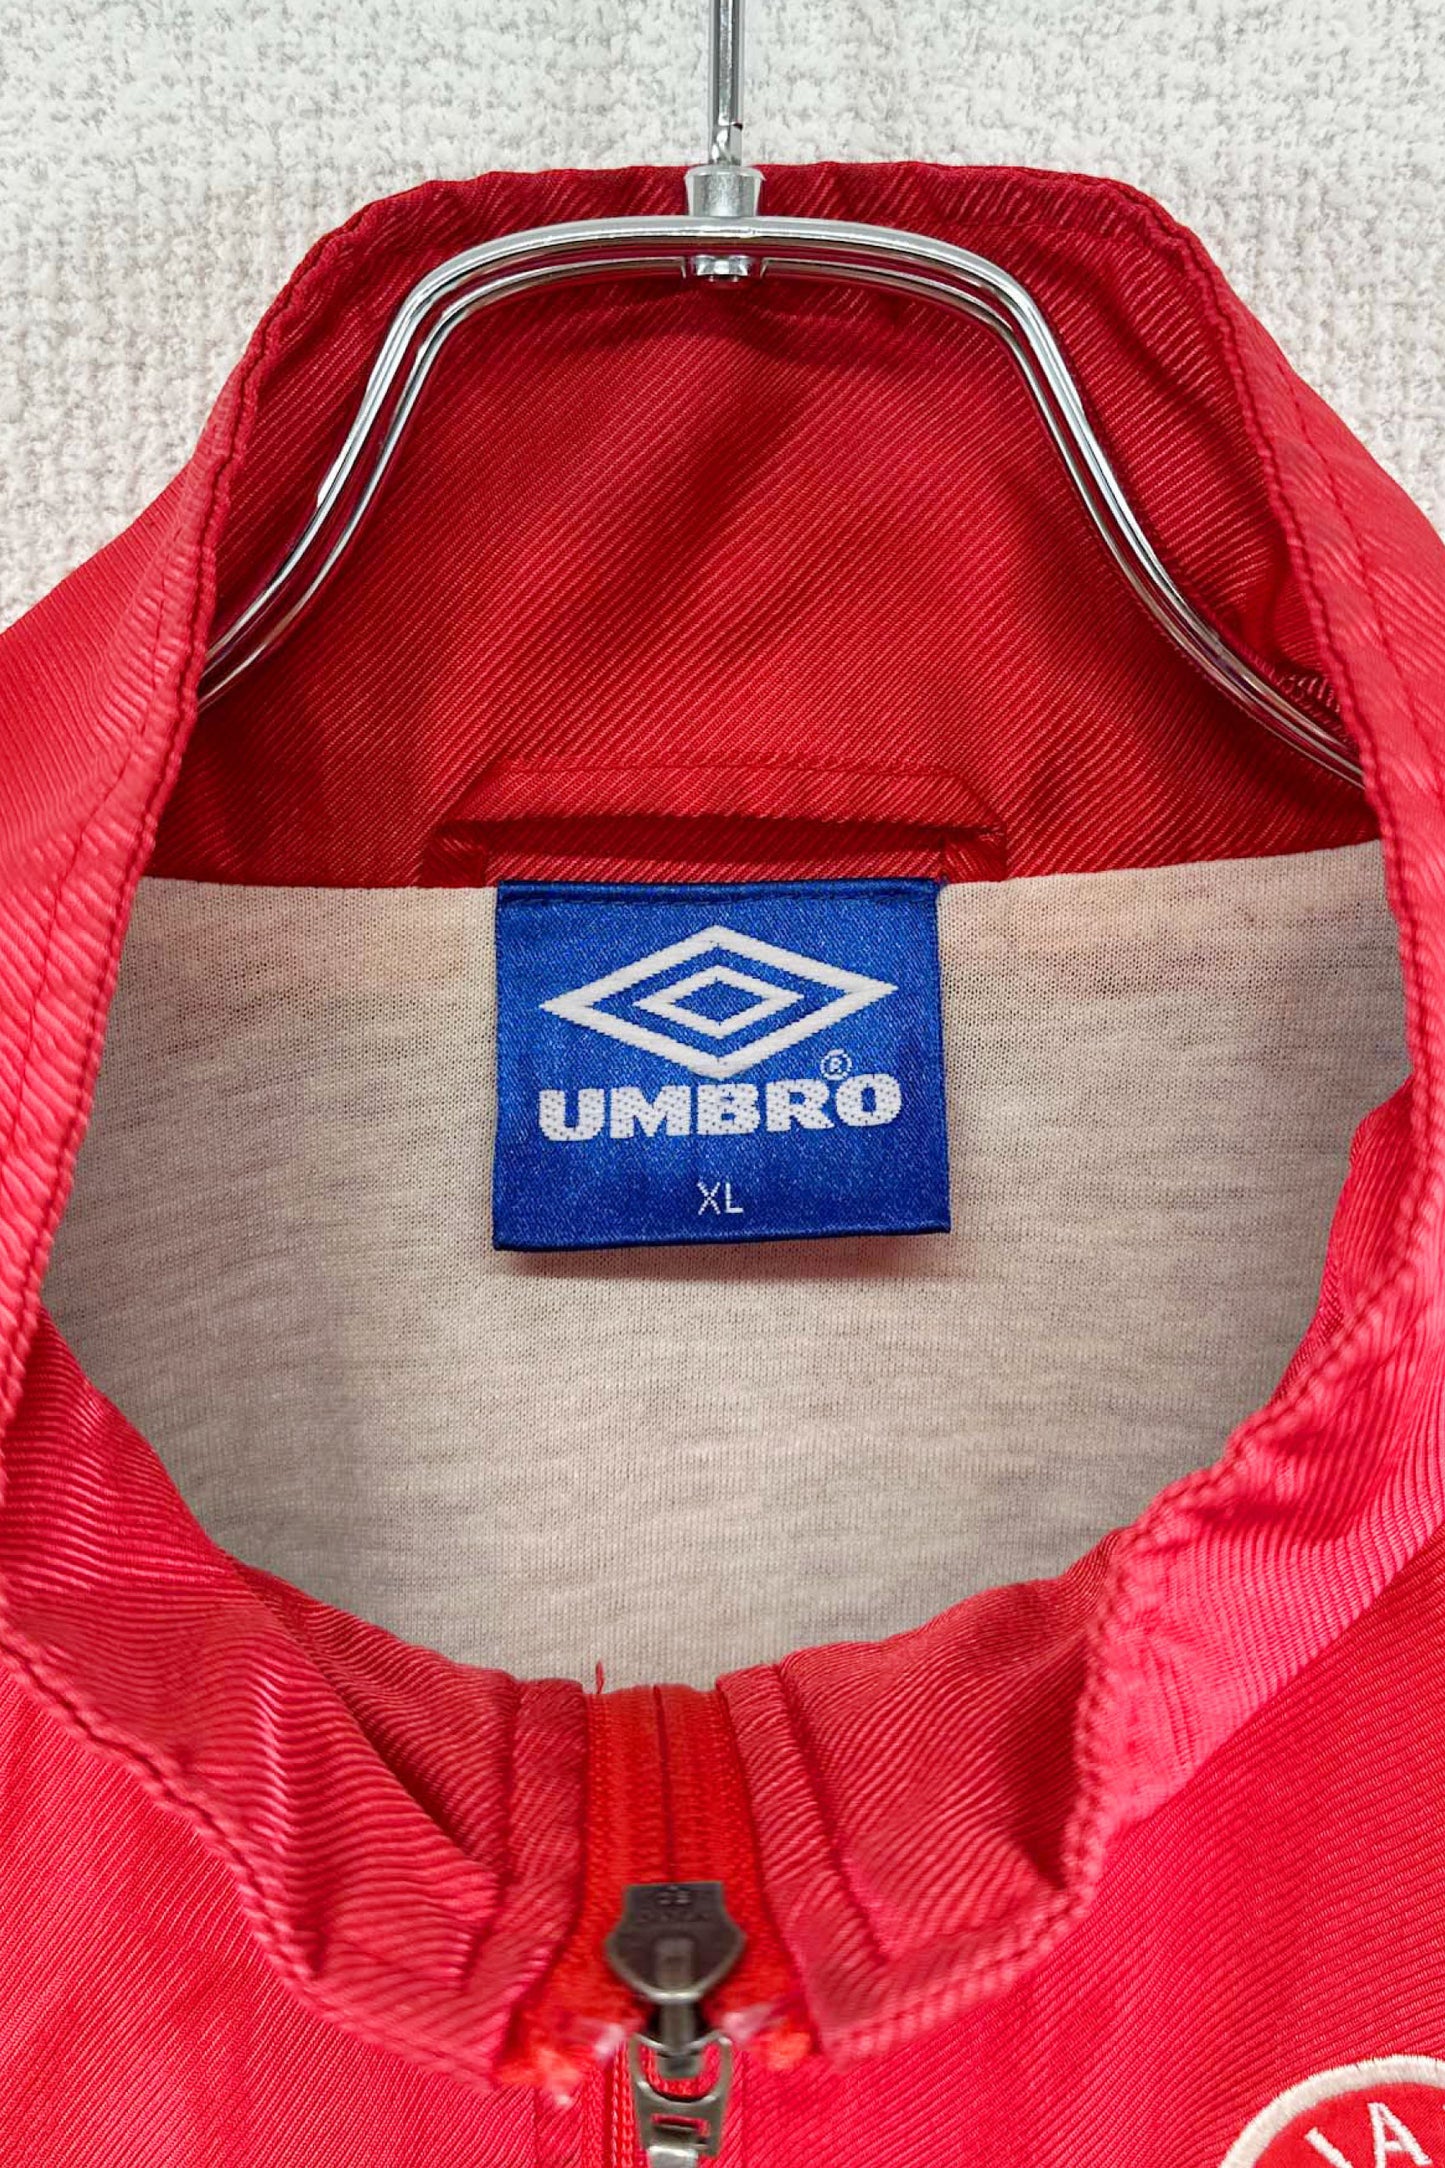 90‘s UNBRO red jacket